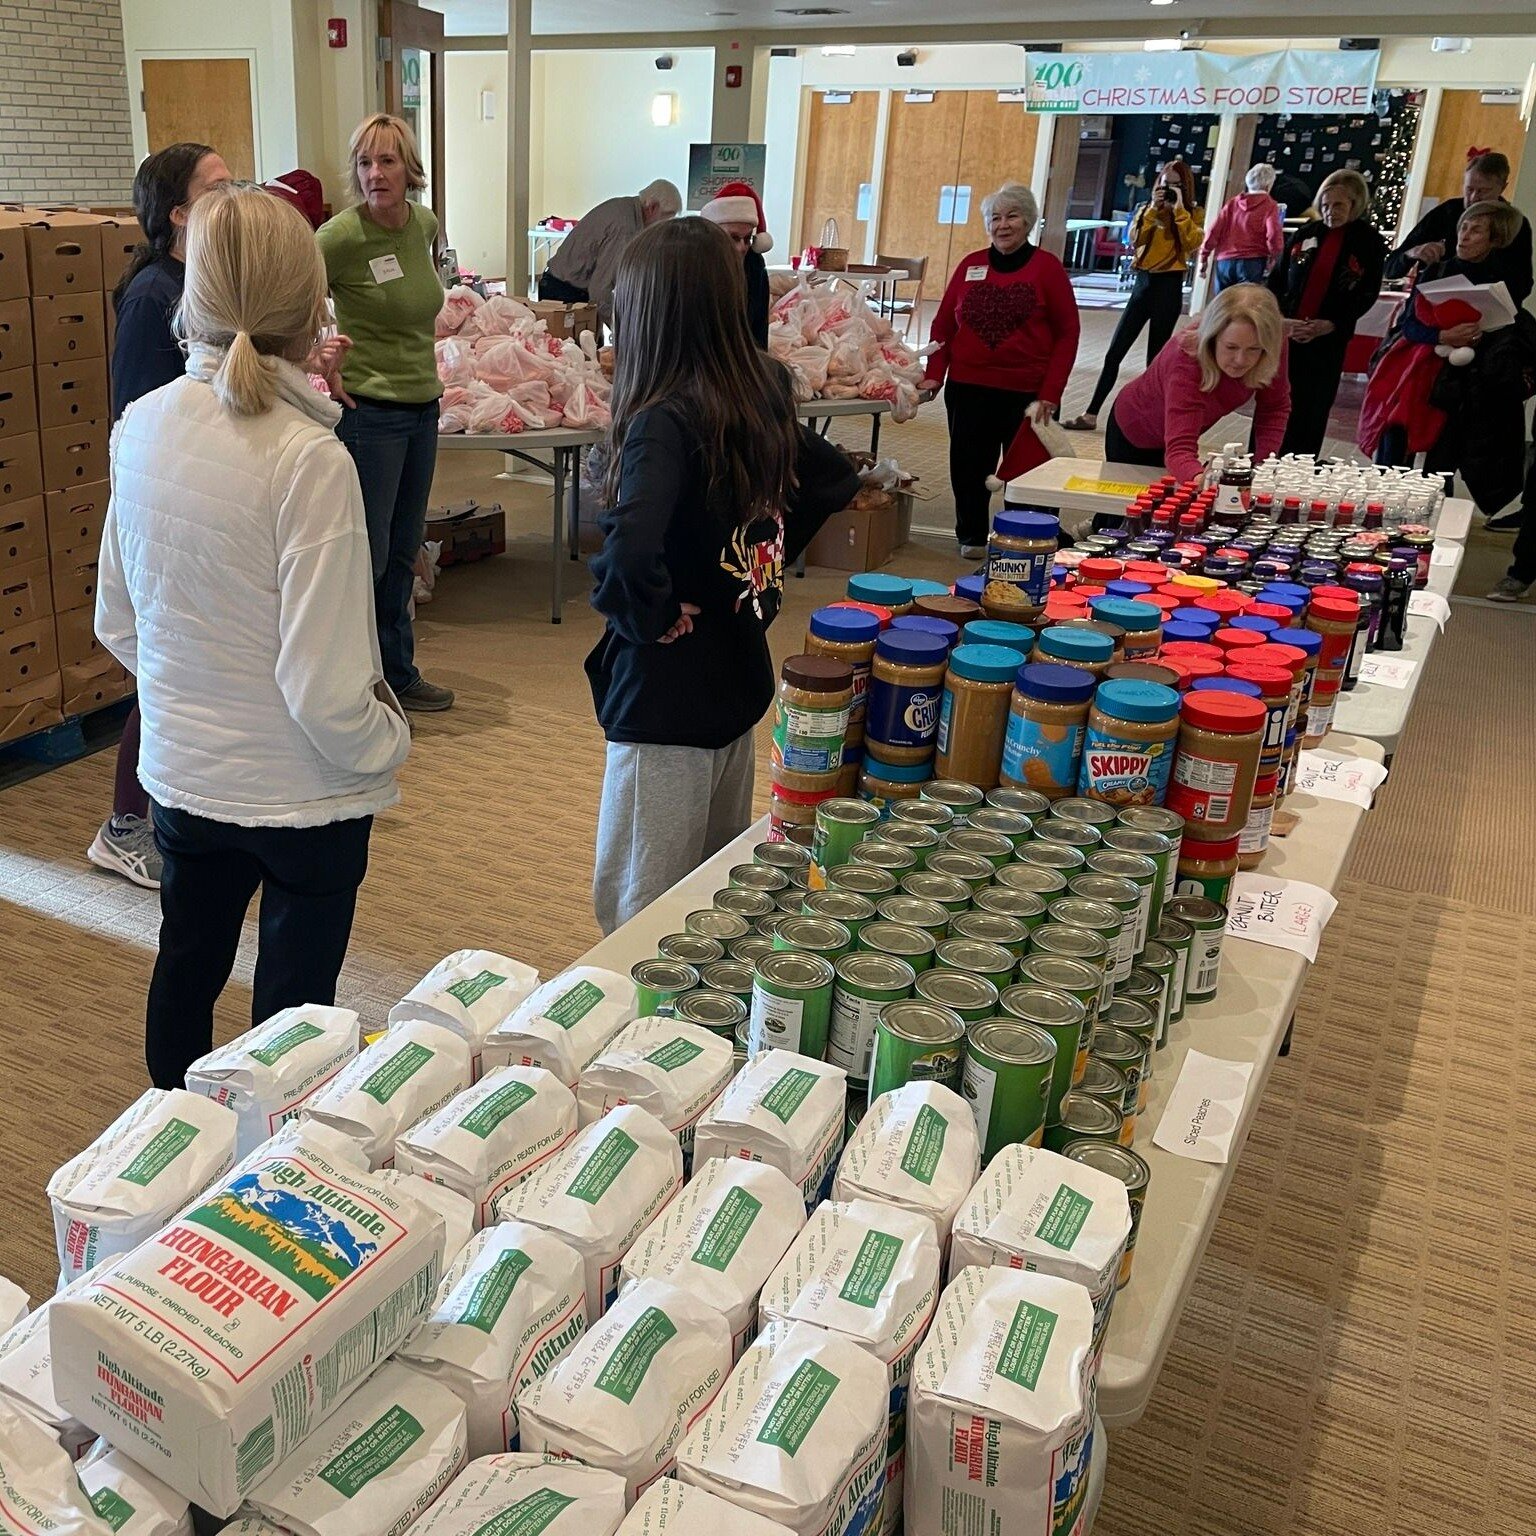 Behold the work of the Hunger Task Force @wpcdenver ! For 35 years, this incredible team has been &quot;adopting&quot; families during the holidays and providing generous bundles of staples like PB&amp;J, sugar, flour, soups, fresh produce, and warm 